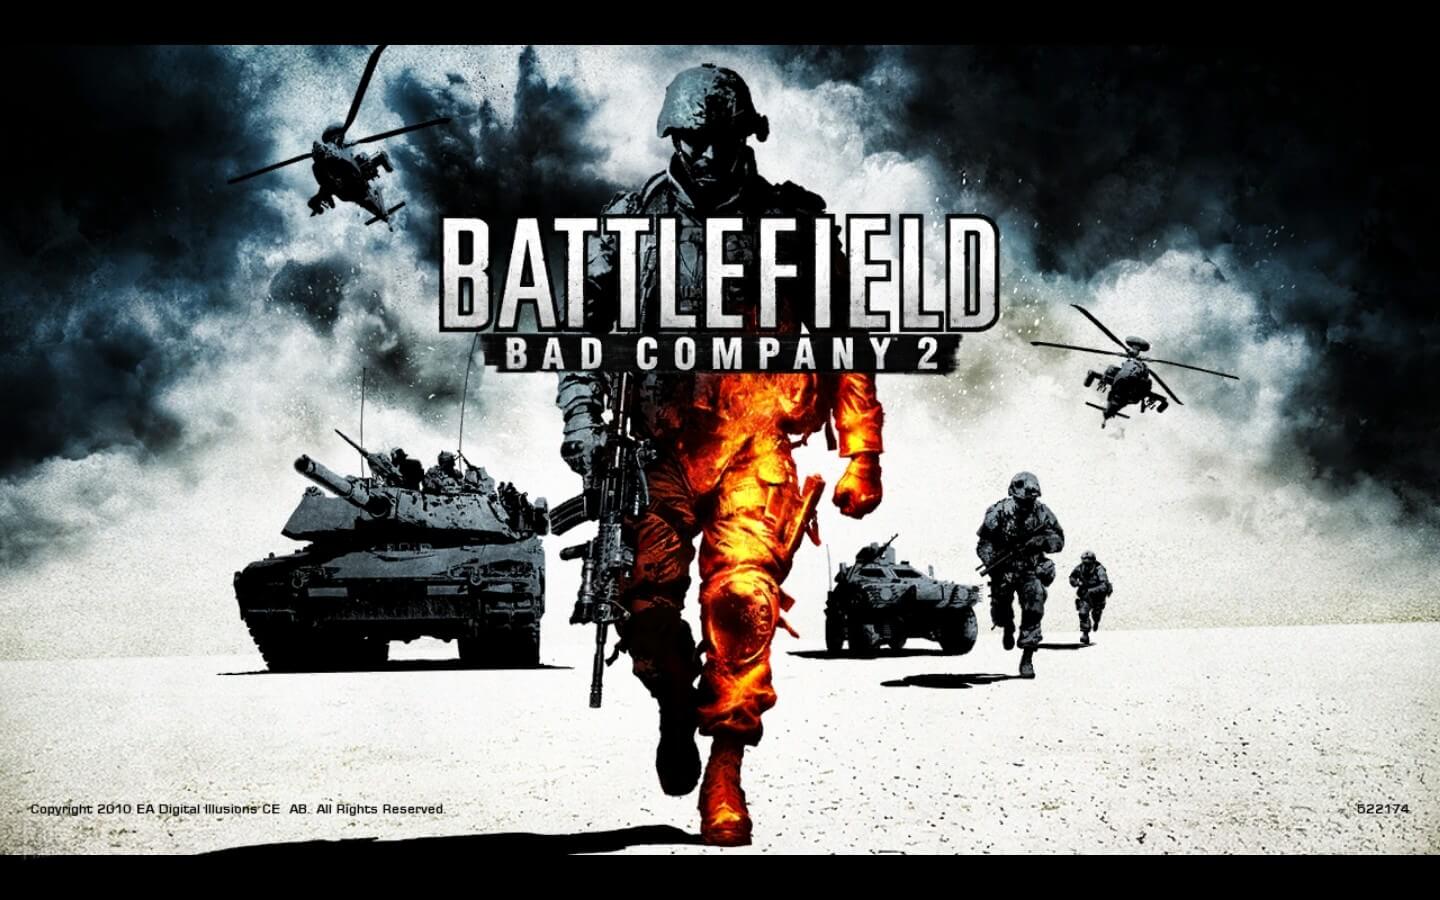 Battlefield: Bad Company 2 Highly Compressed For PC in 500 MB Parts - TraX Gaming Center